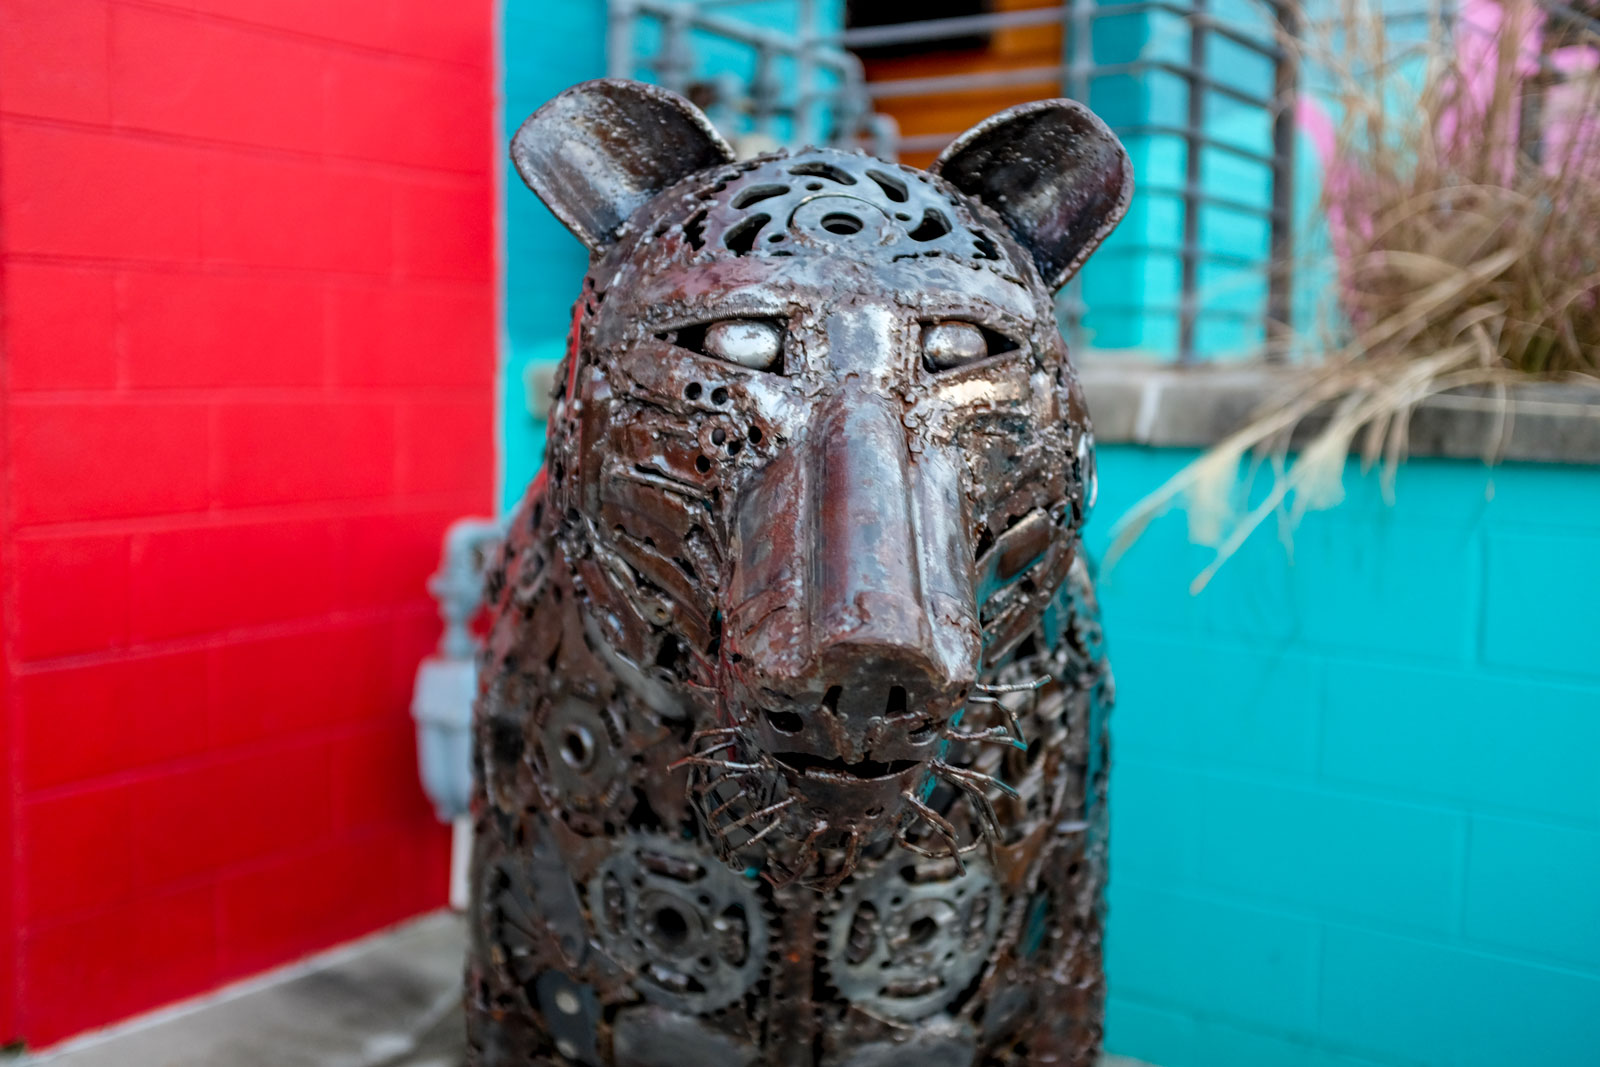 A big cat sculpture at the River Arts District in Asheville